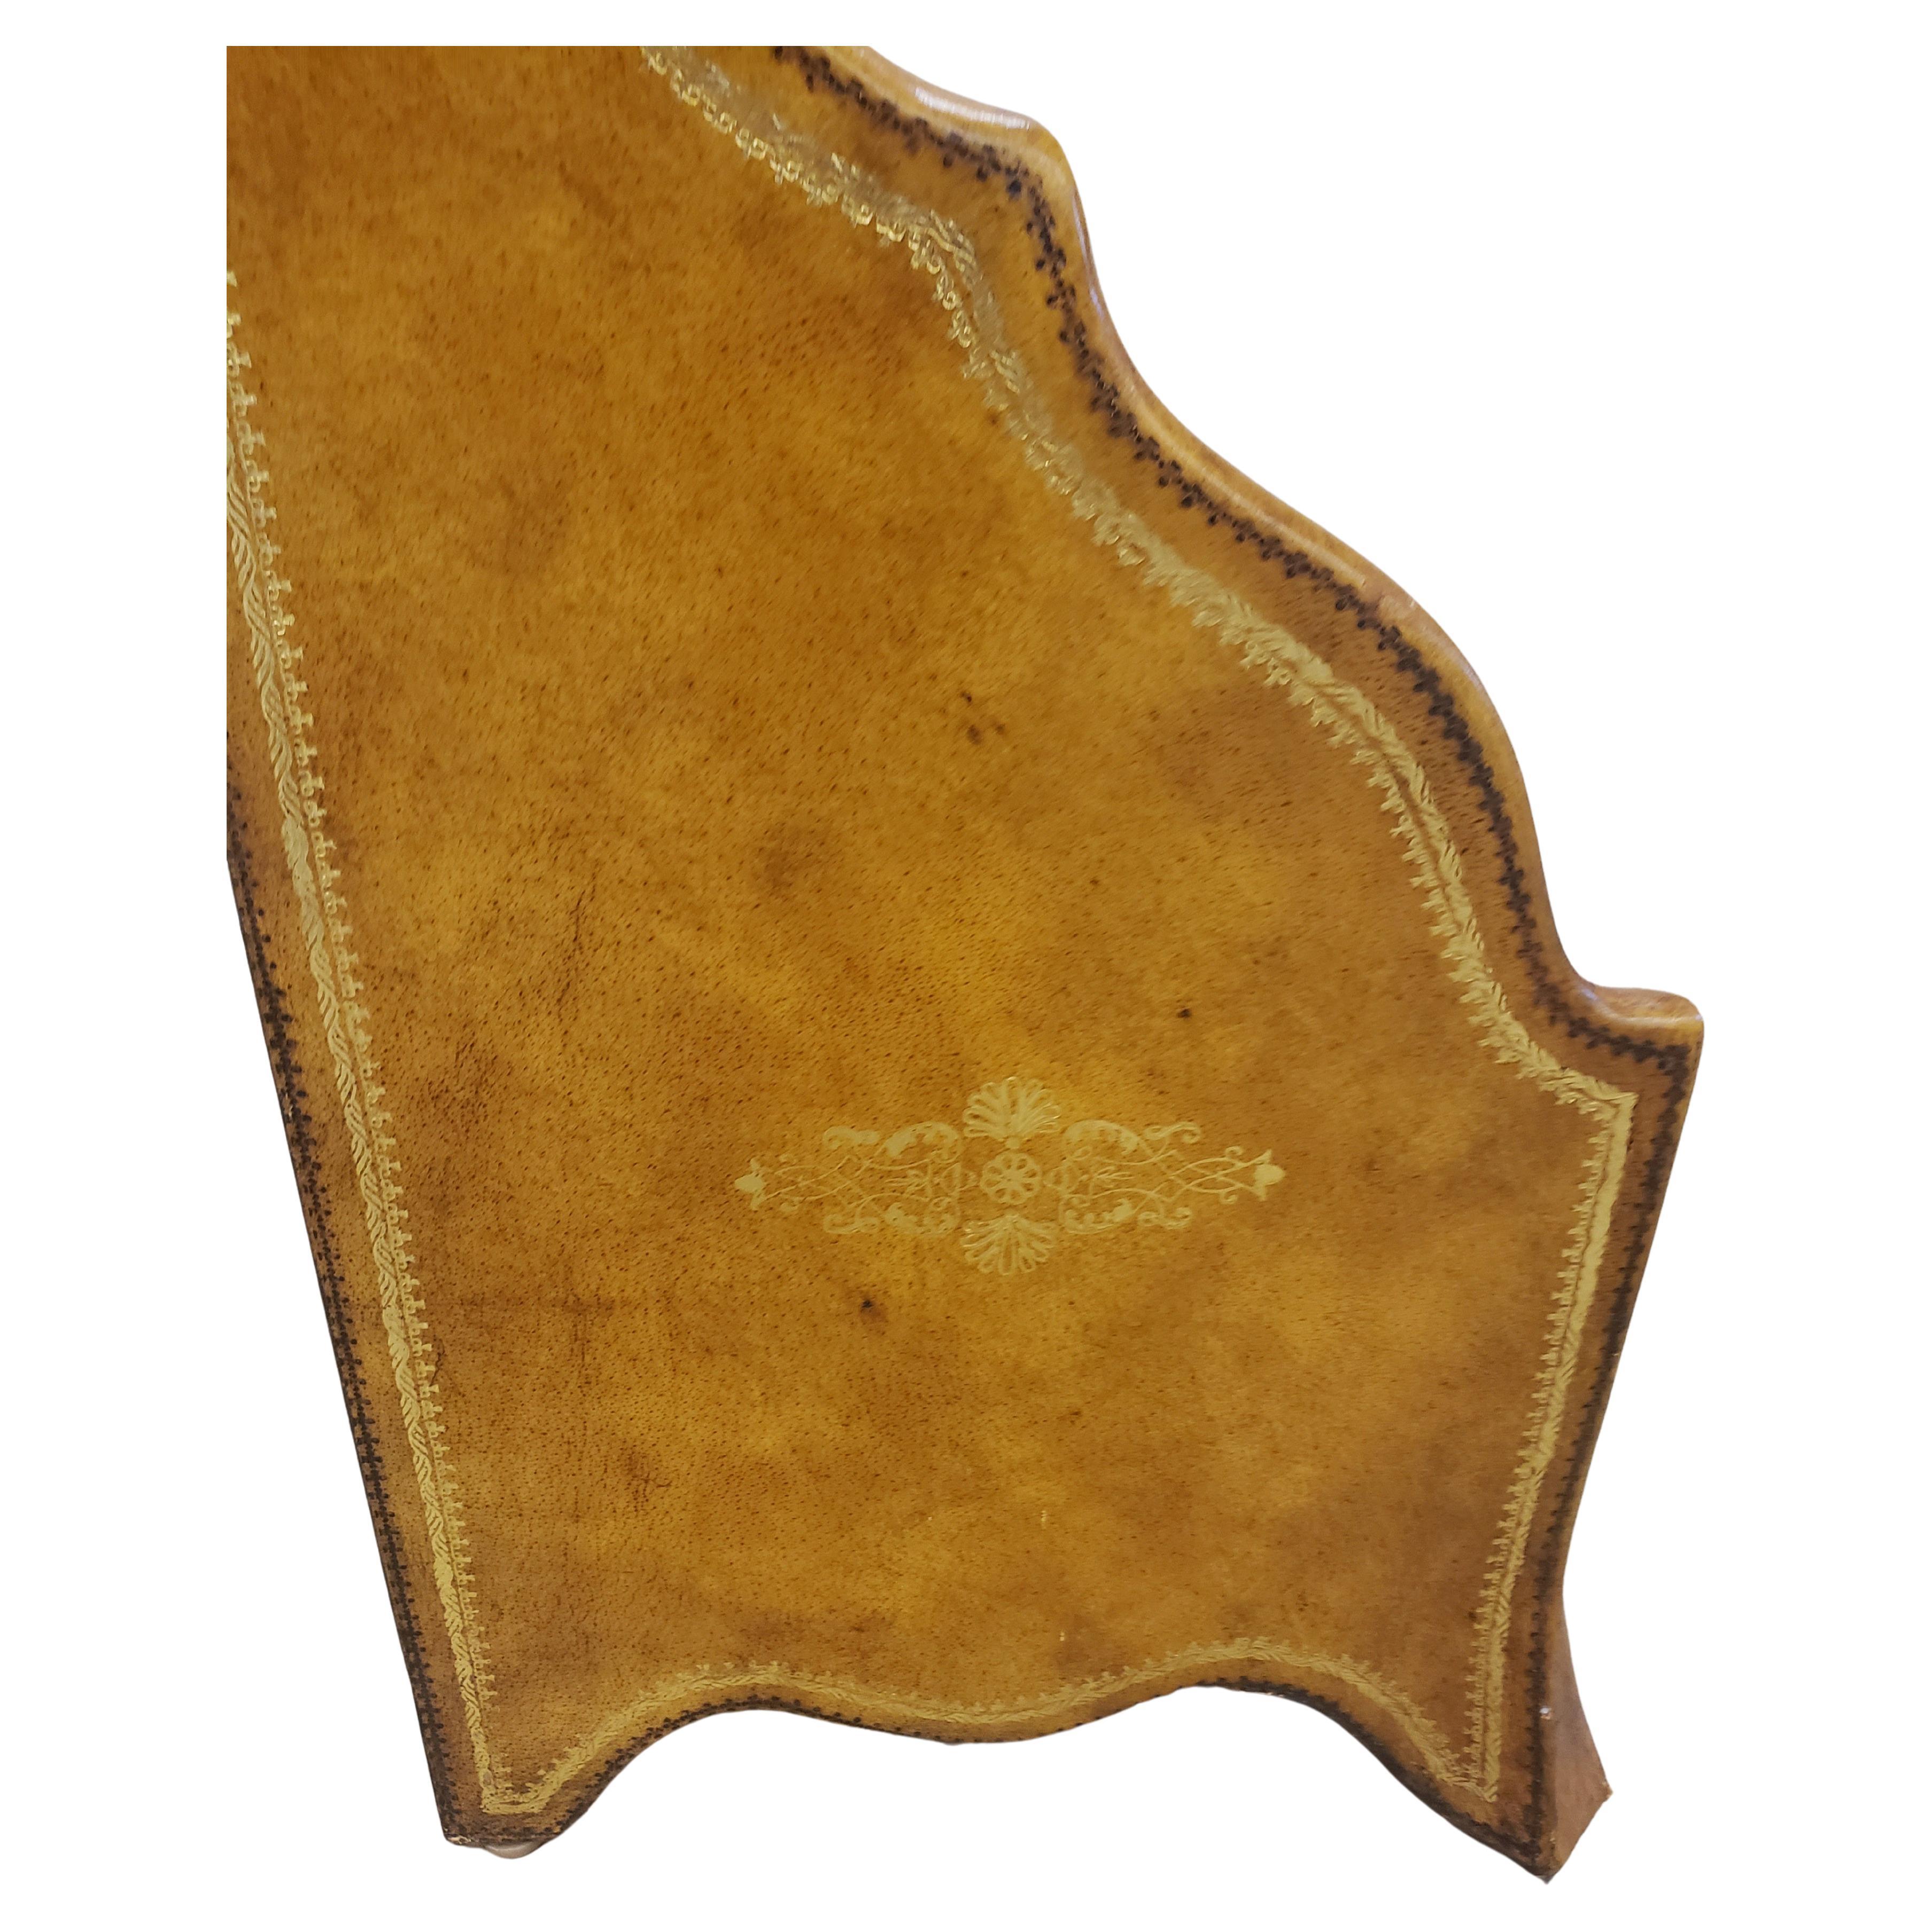 Maitland Smith Neoclassical Brown Leather Upholstered Magazine or Letter Stand In Good Condition For Sale In Germantown, MD